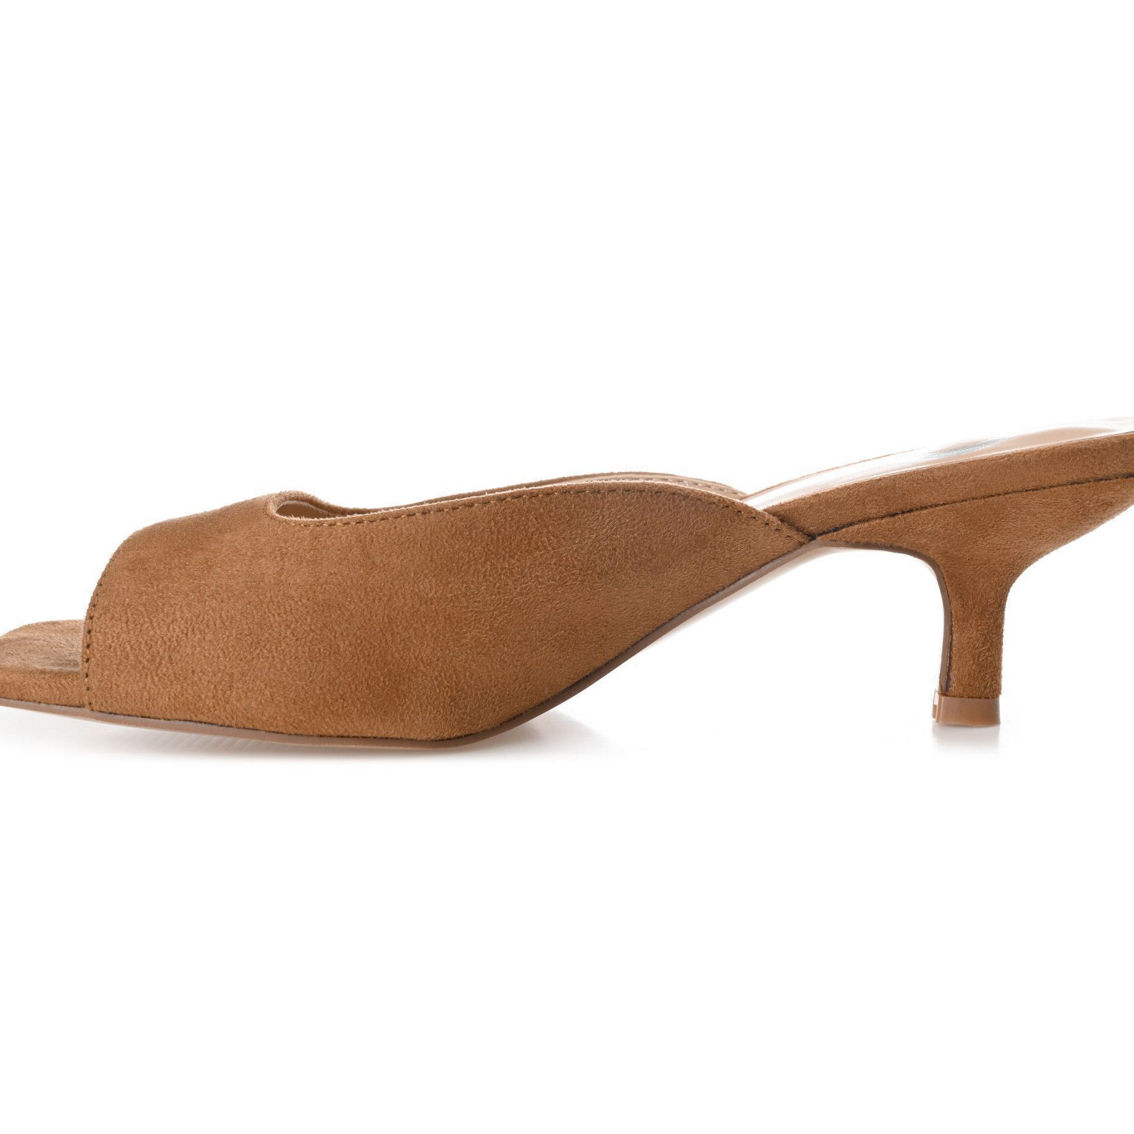 Journee Collection Women's Medium and Wide Larna pump - Image 4 of 5